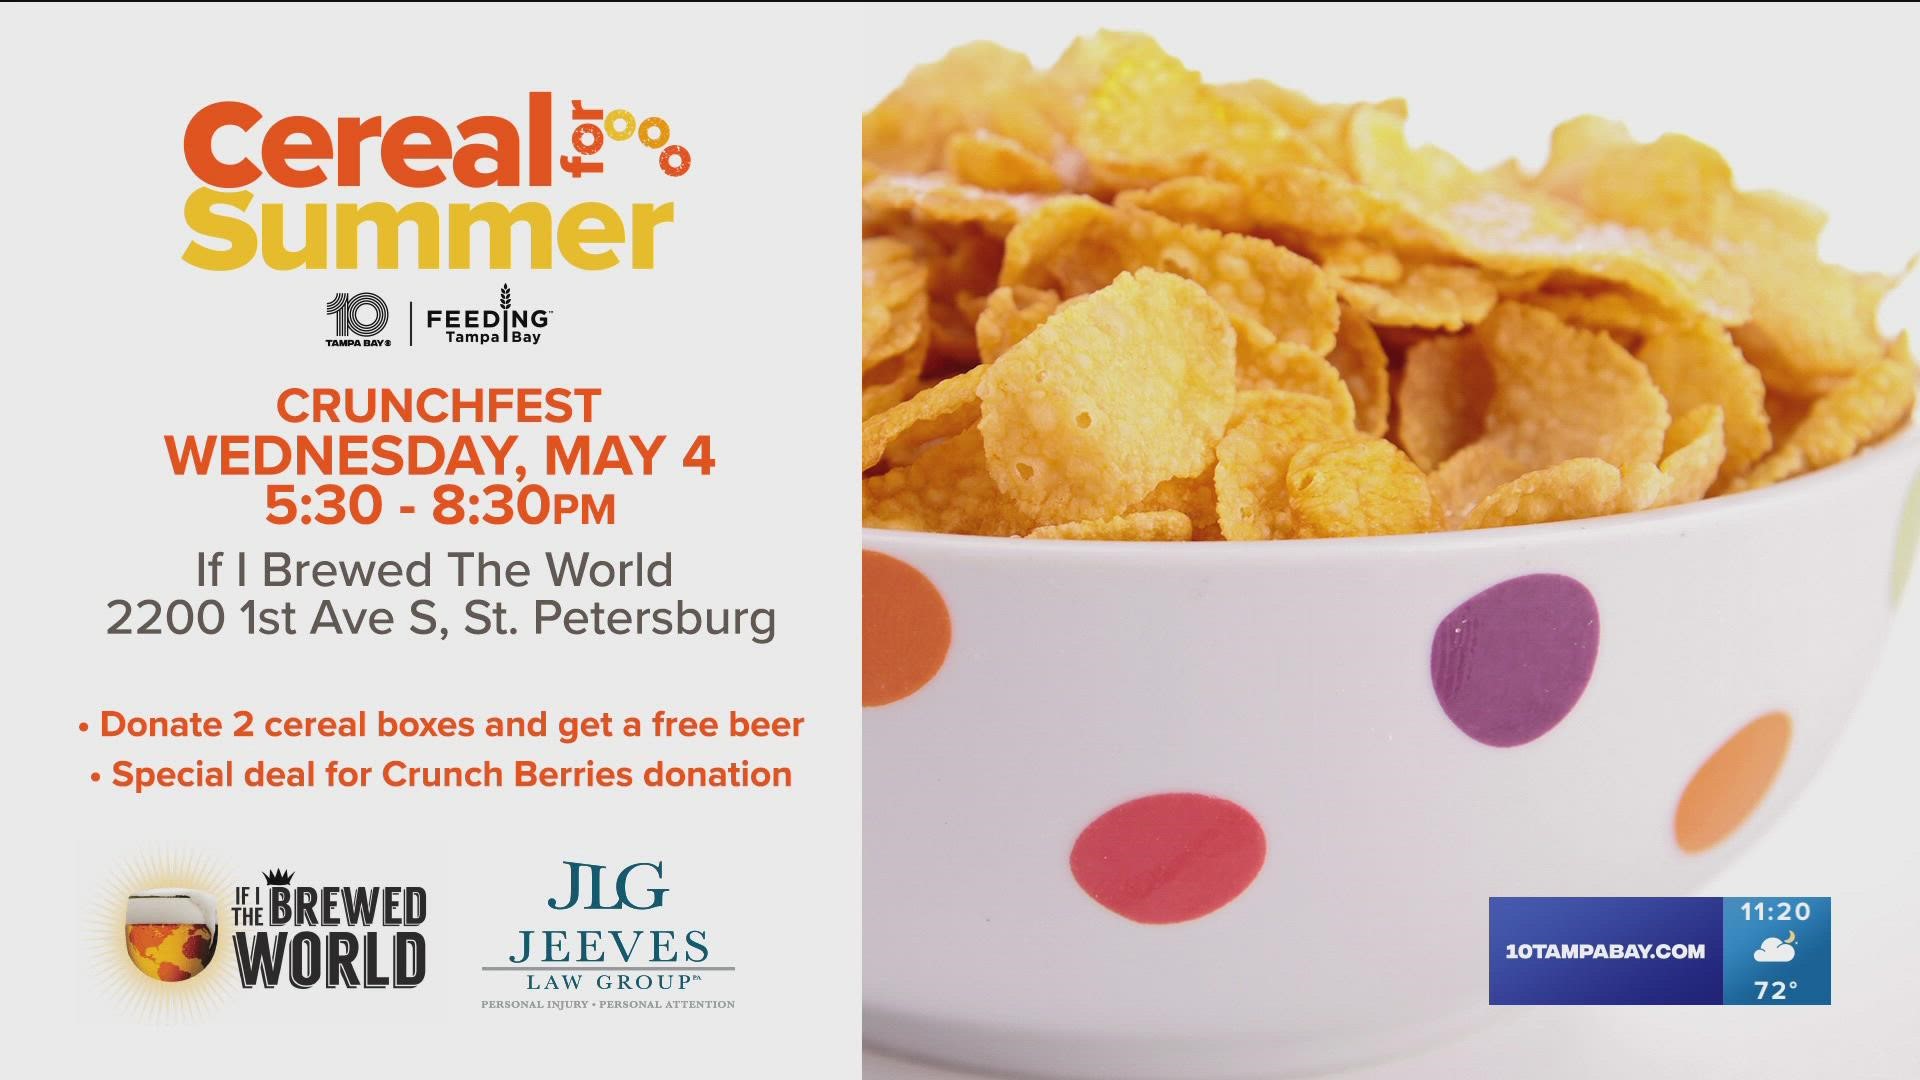 Donate two boxes of cereal and get a free beer at 'If I Brewed the World' on May 4.